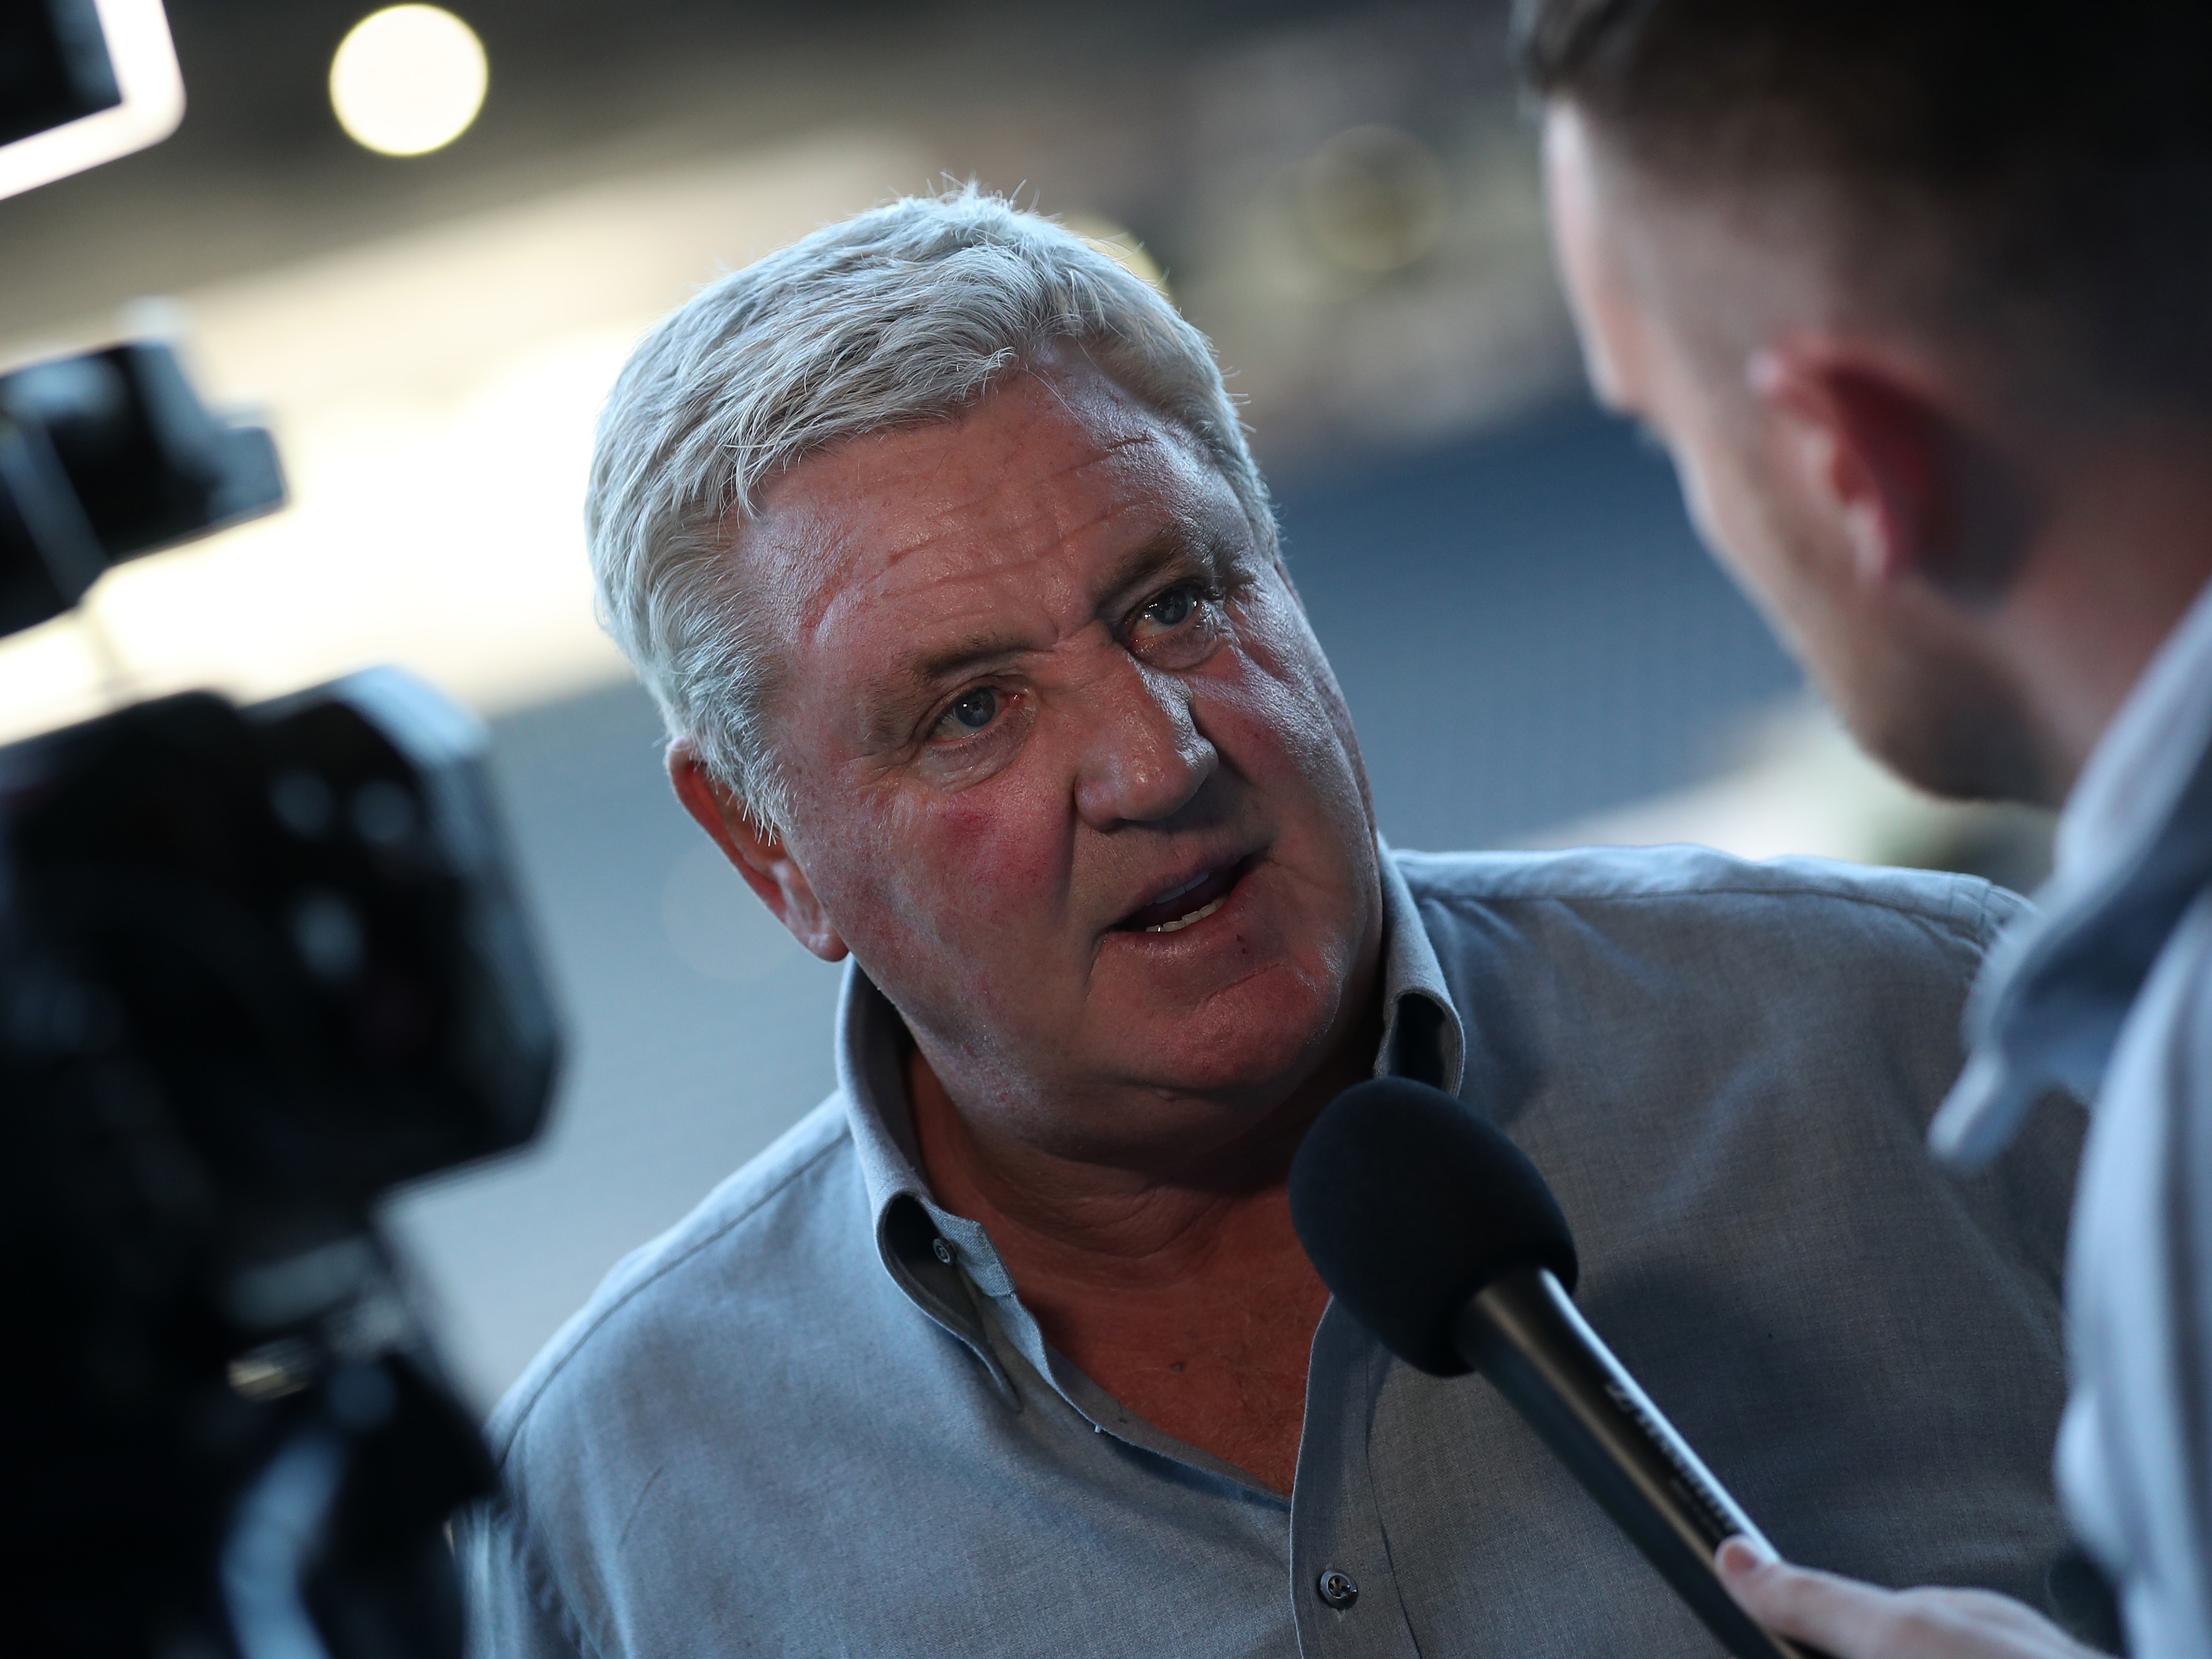 Steve Bruce is interviewed after defeat to Swansea City